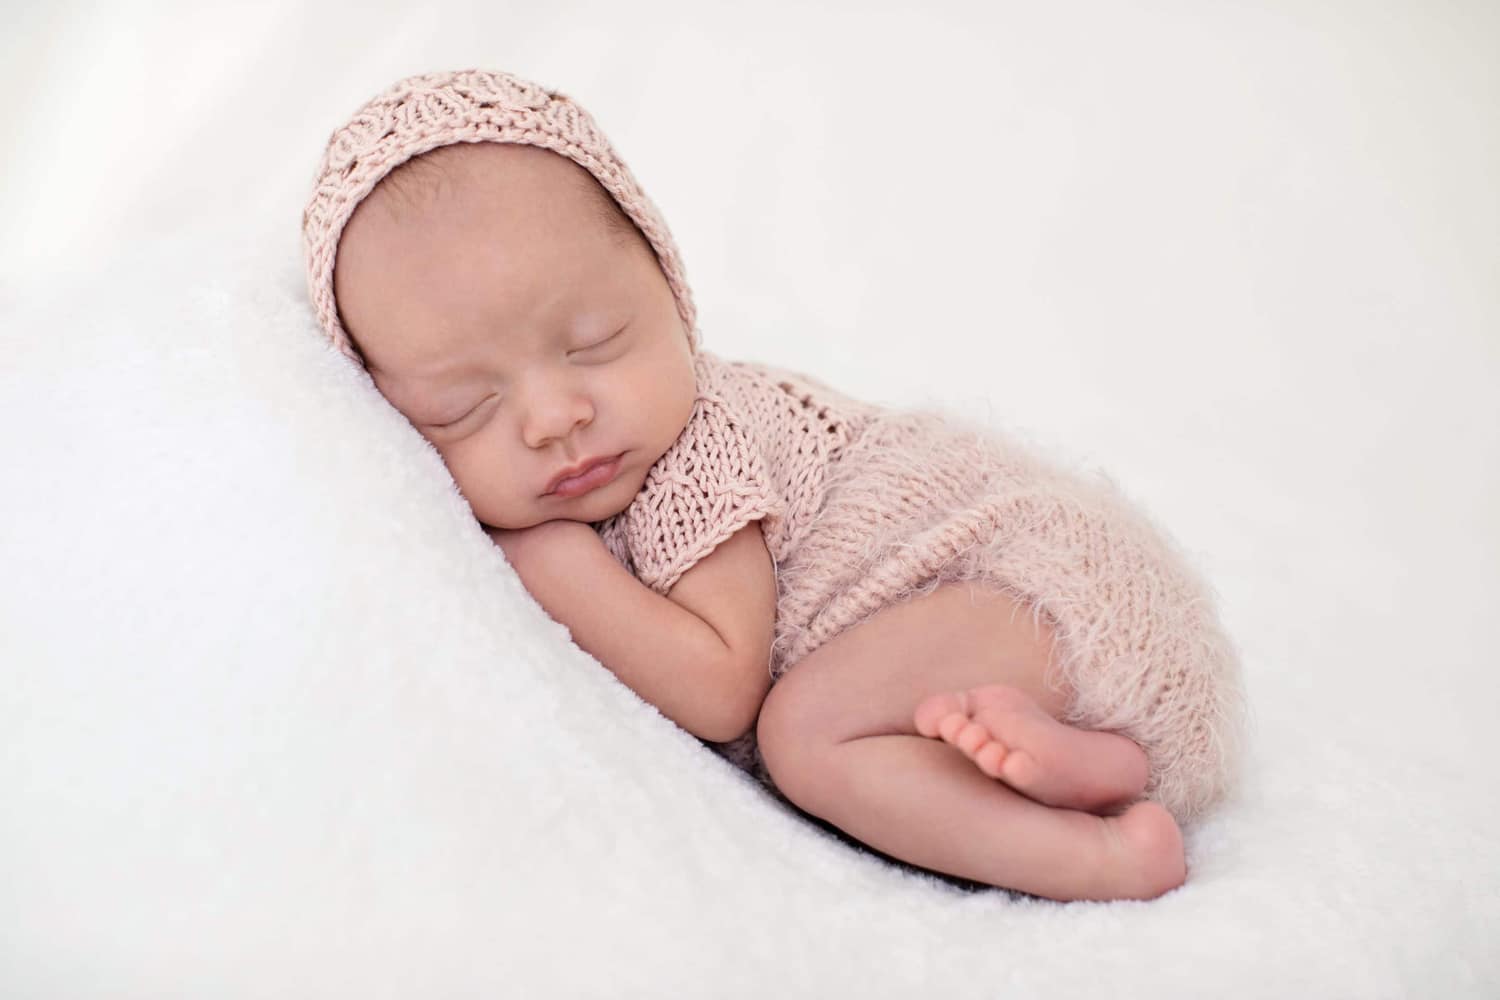 A baby snuggles on a white pillow wearing a pink knit outfit.